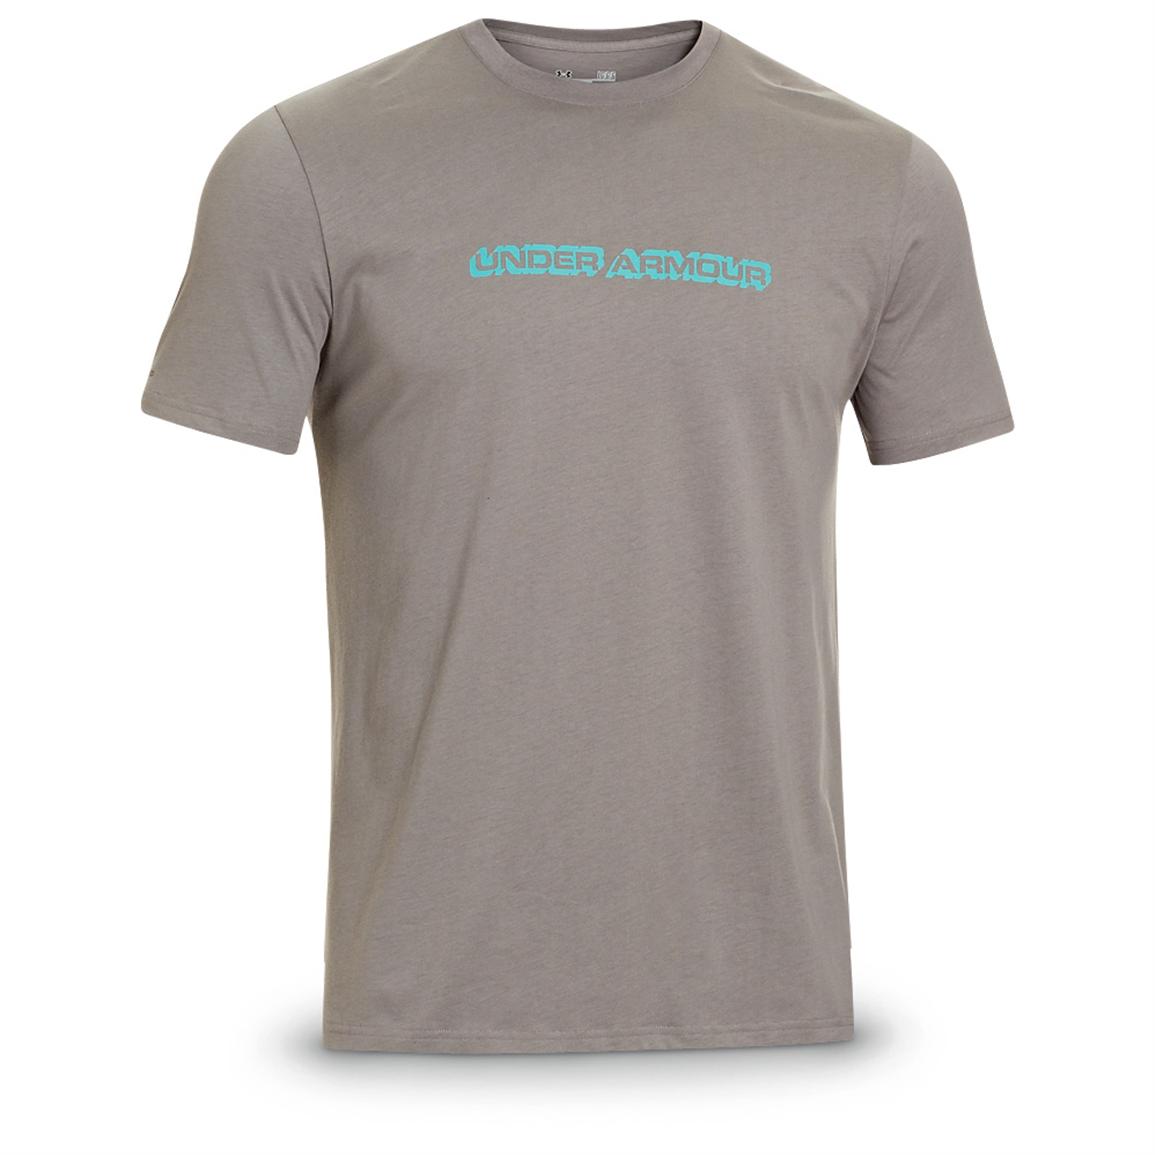 Under Armour Hooked Bass T-Shirt - 424729, T-Shirts at Sportsman's Guide